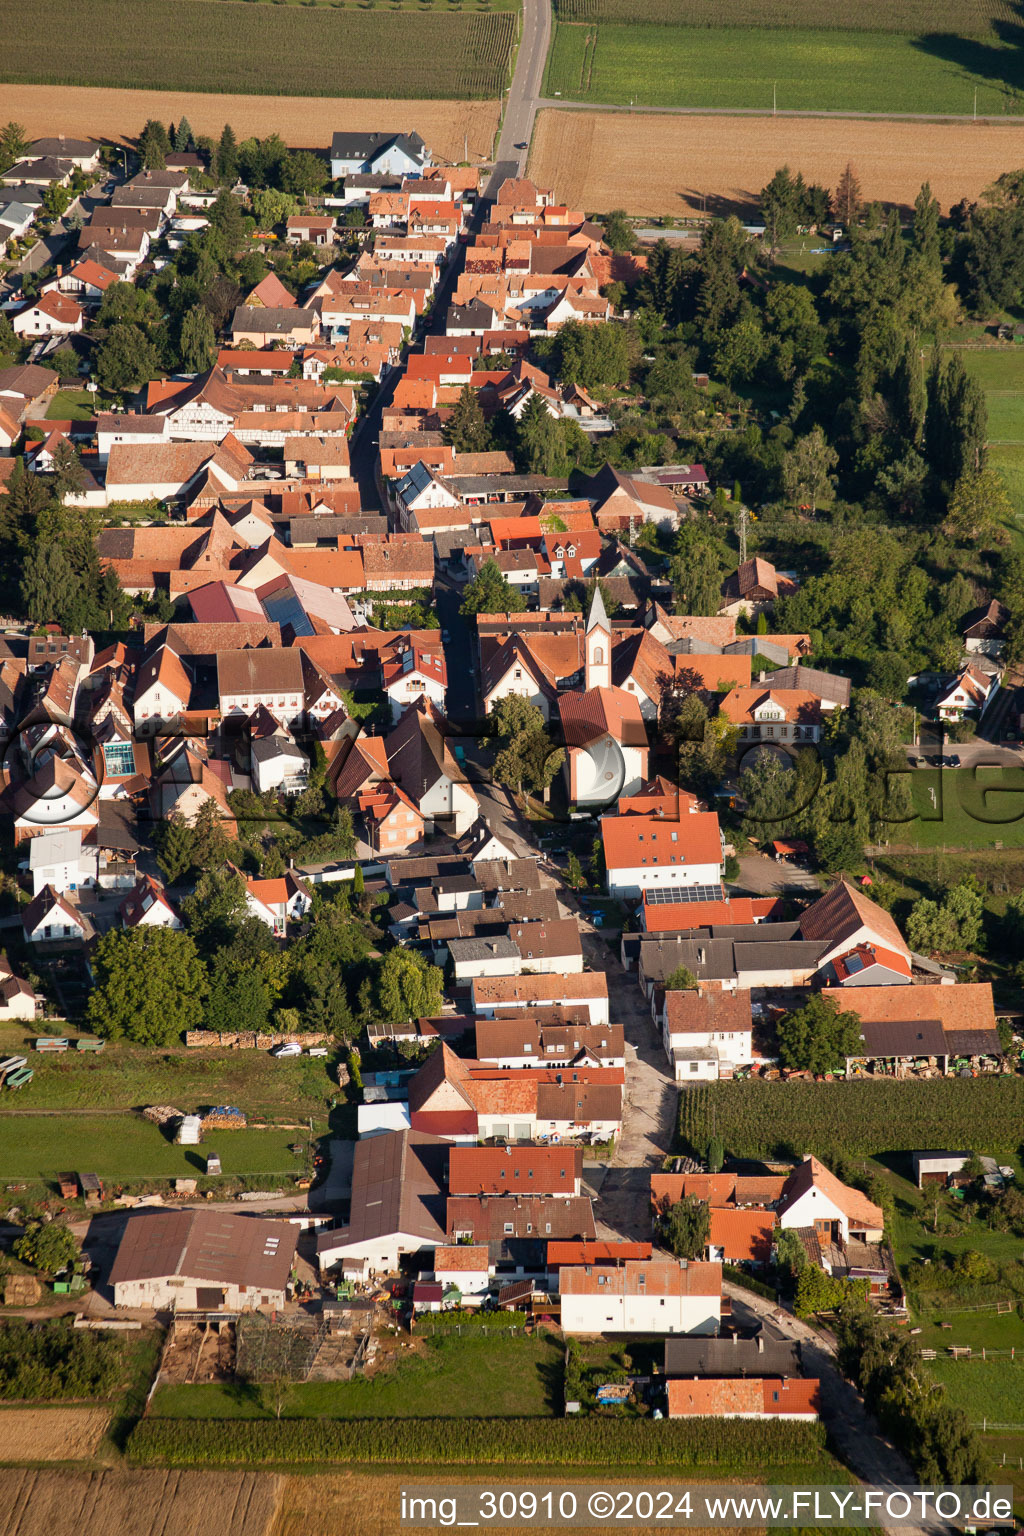 Oblique view of Town View of the streets and houses of the residential areas in the district Muehlhofen in Billigheim-Ingenheim in the state Rhineland-Palatinate